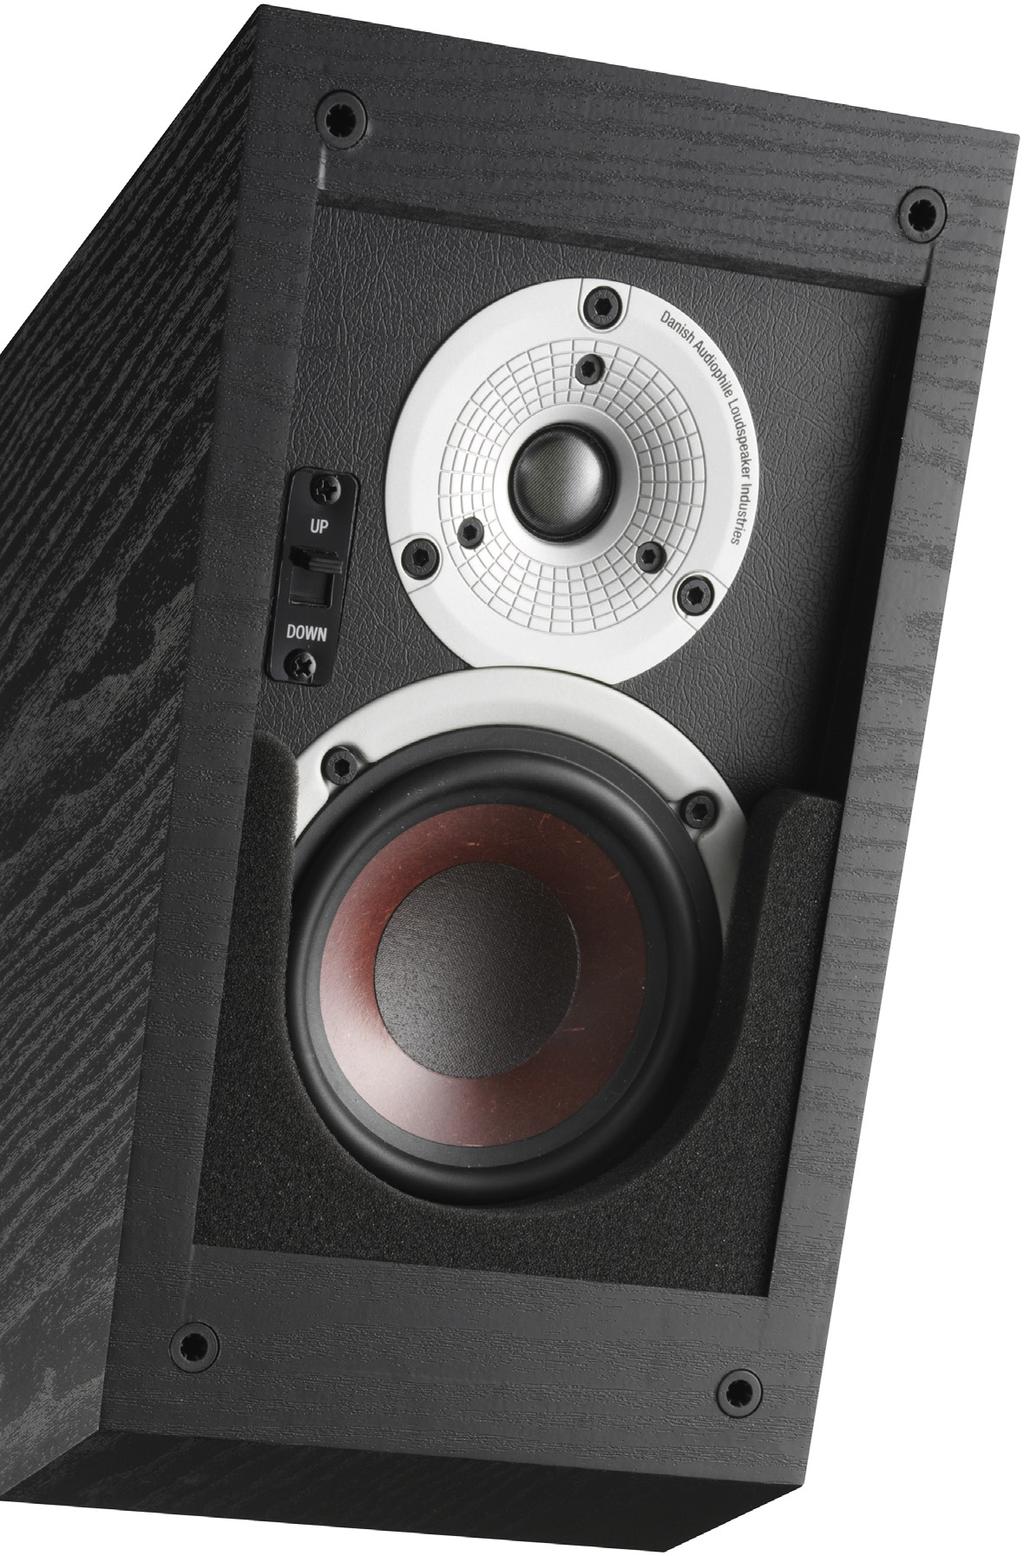 HEIGHT SPEAKERS Movies with a Dolby Atmos, DTS:X or Auro-3D sound track are becoming more and more the standard.